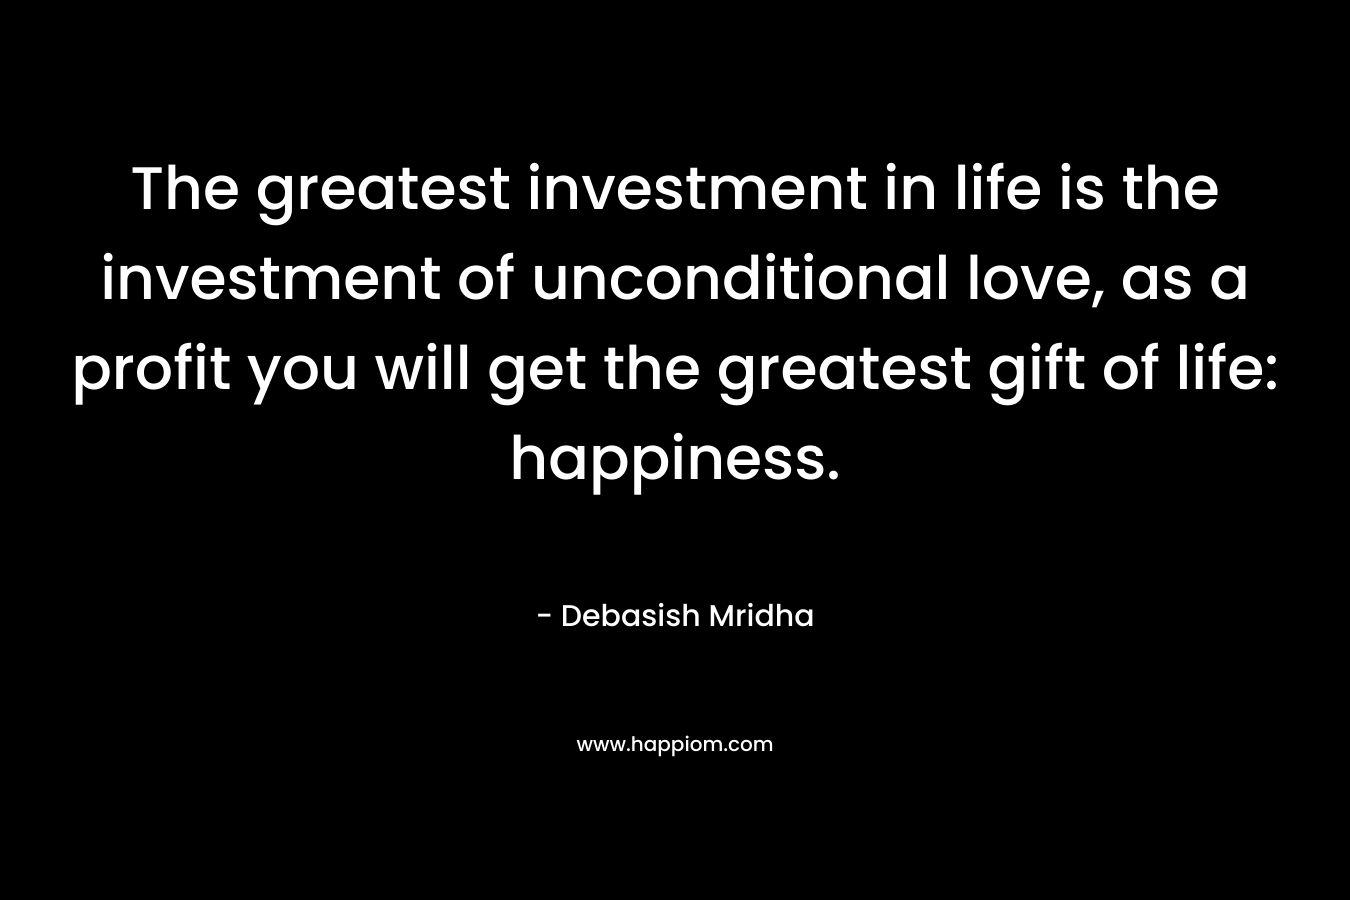 The greatest investment in life is the investment of unconditional love, as a profit you will get the greatest gift of life: happiness.